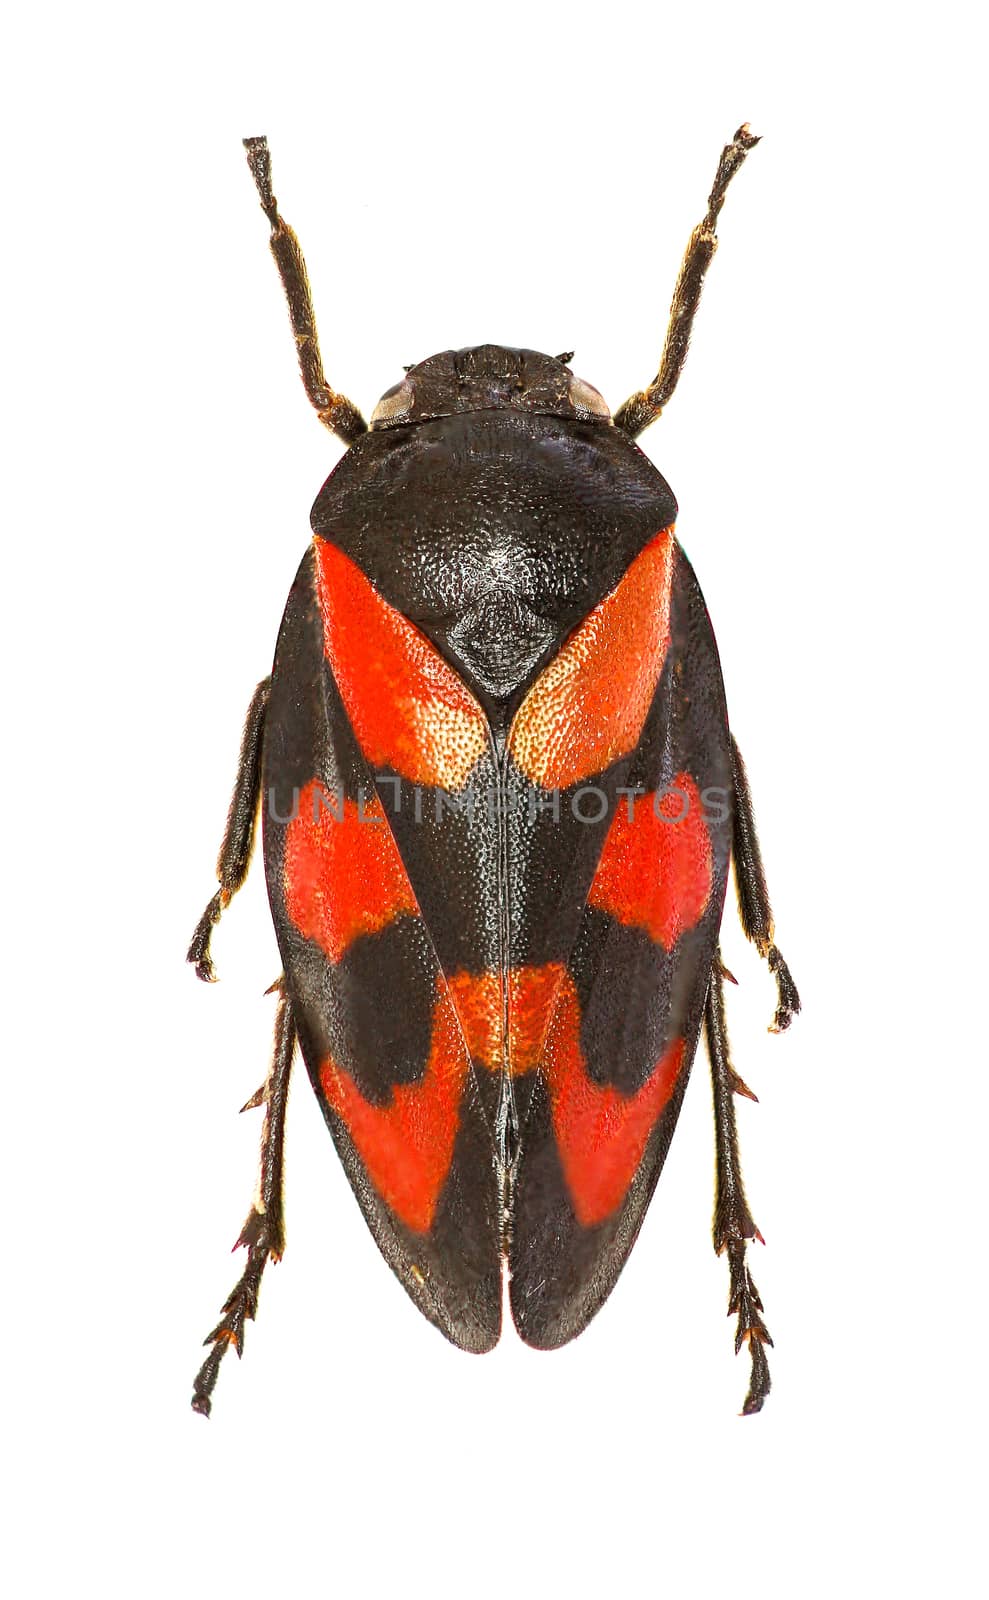 Red and Black Froghopper on white Background  -  Cercopis vulnerata (Rossi, 1807) by gstalker